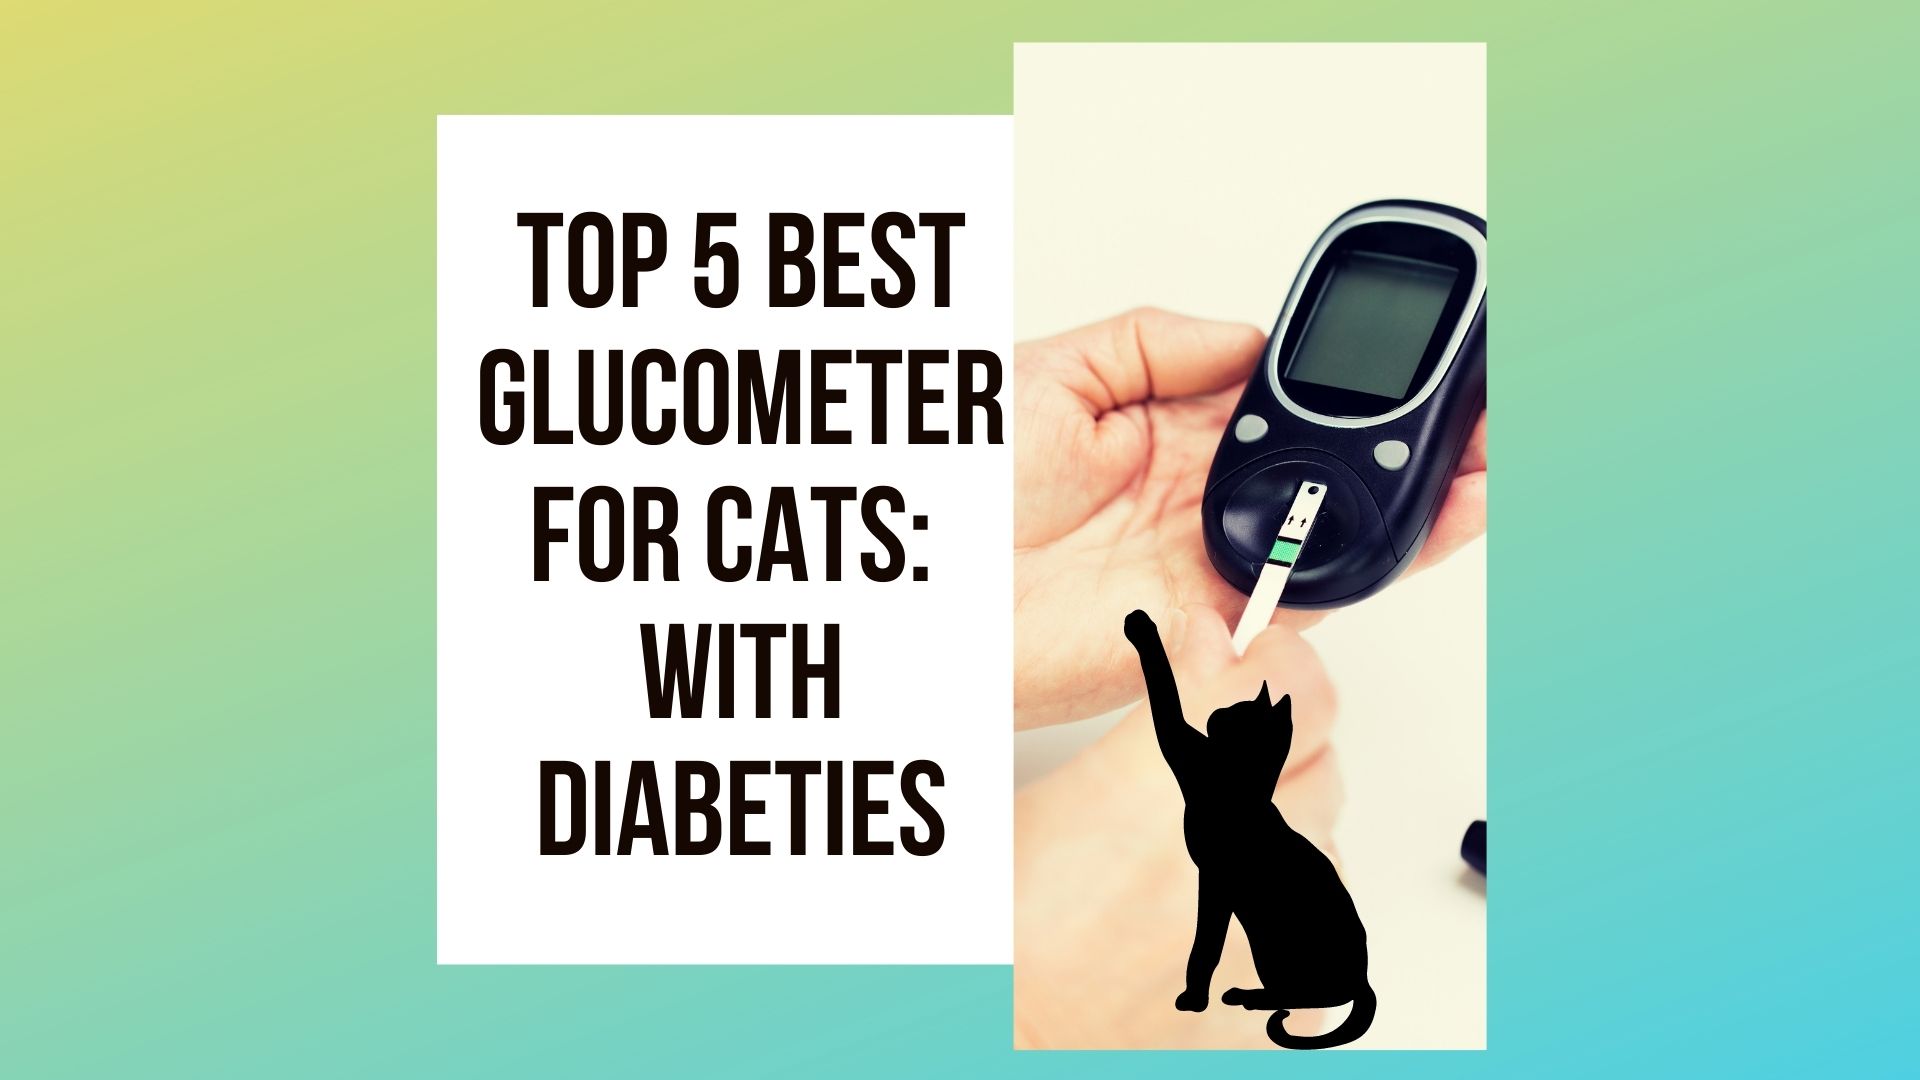 Choosing the Best Glucometer for Cats: Top 5